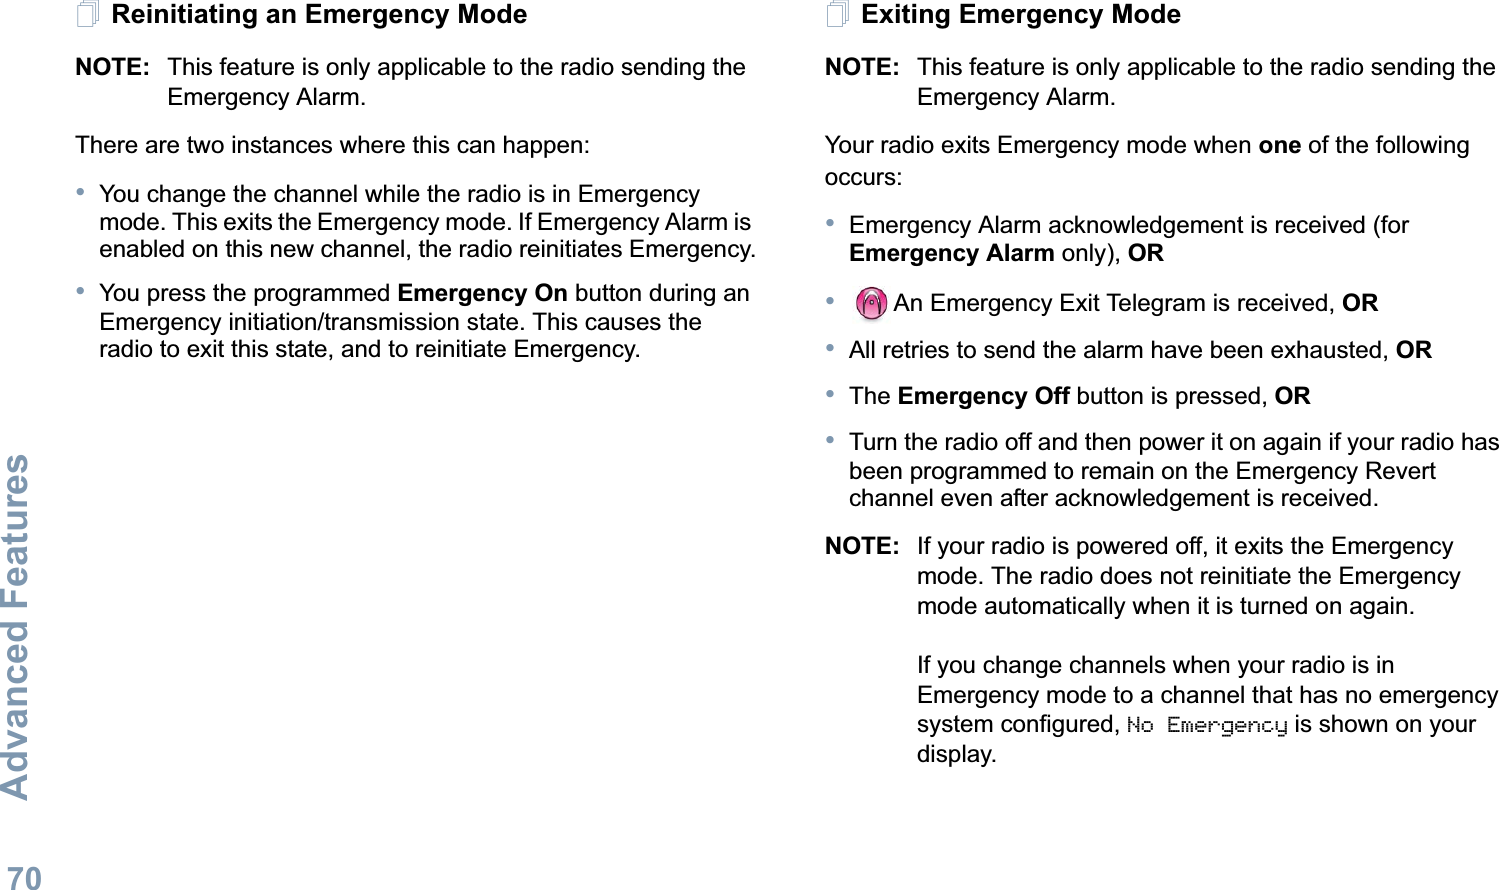 Advanced FeaturesEnglish70Reinitiating an Emergency ModeNOTE: This feature is only applicable to the radio sending the Emergency Alarm.There are two instances where this can happen:•You change the channel while the radio is in Emergency mode. This exits the Emergency mode. If Emergency Alarm is enabled on this new channel, the radio reinitiates Emergency.•You press the programmed Emergency On button during an Emergency initiation/transmission state. This causes the radio to exit this state, and to reinitiate Emergency.Exiting Emergency ModeNOTE: This feature is only applicable to the radio sending the Emergency Alarm.Your radio exits Emergency mode when one of the following occurs:•Emergency Alarm acknowledgement is received (for Emergency Alarm only), OR•An Emergency Exit Telegram is received, OR•All retries to send the alarm have been exhausted, OR•The Emergency Off button is pressed, OR•Turn the radio off and then power it on again if your radio has been programmed to remain on the Emergency Revert channel even after acknowledgement is received. NOTE: If your radio is powered off, it exits the Emergency mode. The radio does not reinitiate the Emergency mode automatically when it is turned on again.If you change channels when your radio is in Emergency mode to a channel that has no emergency system configured, No Emergency is shown on your display. 